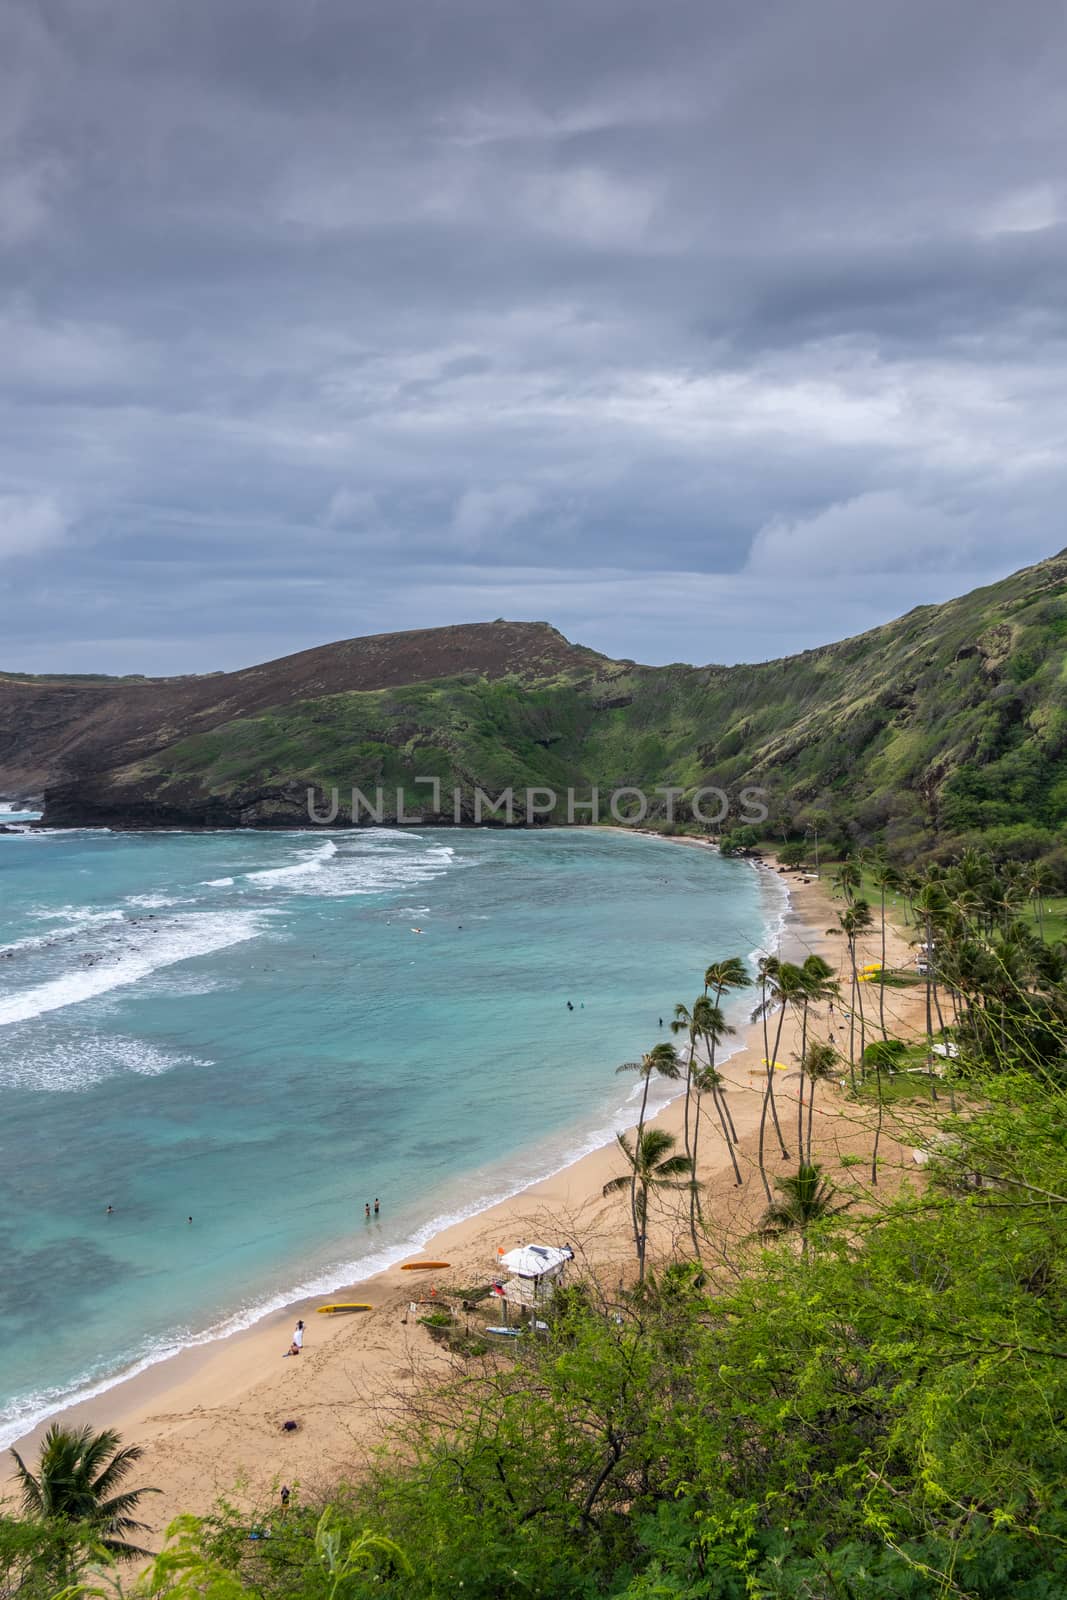 Oahu, Hawaii, USA. - January 11, 2020: Hanauma Bay Nature Preserve. People on Brown sandy beach with palmtrees, white surf on azure water, green cliffs and rocks. All under heavy storm cloudscape.